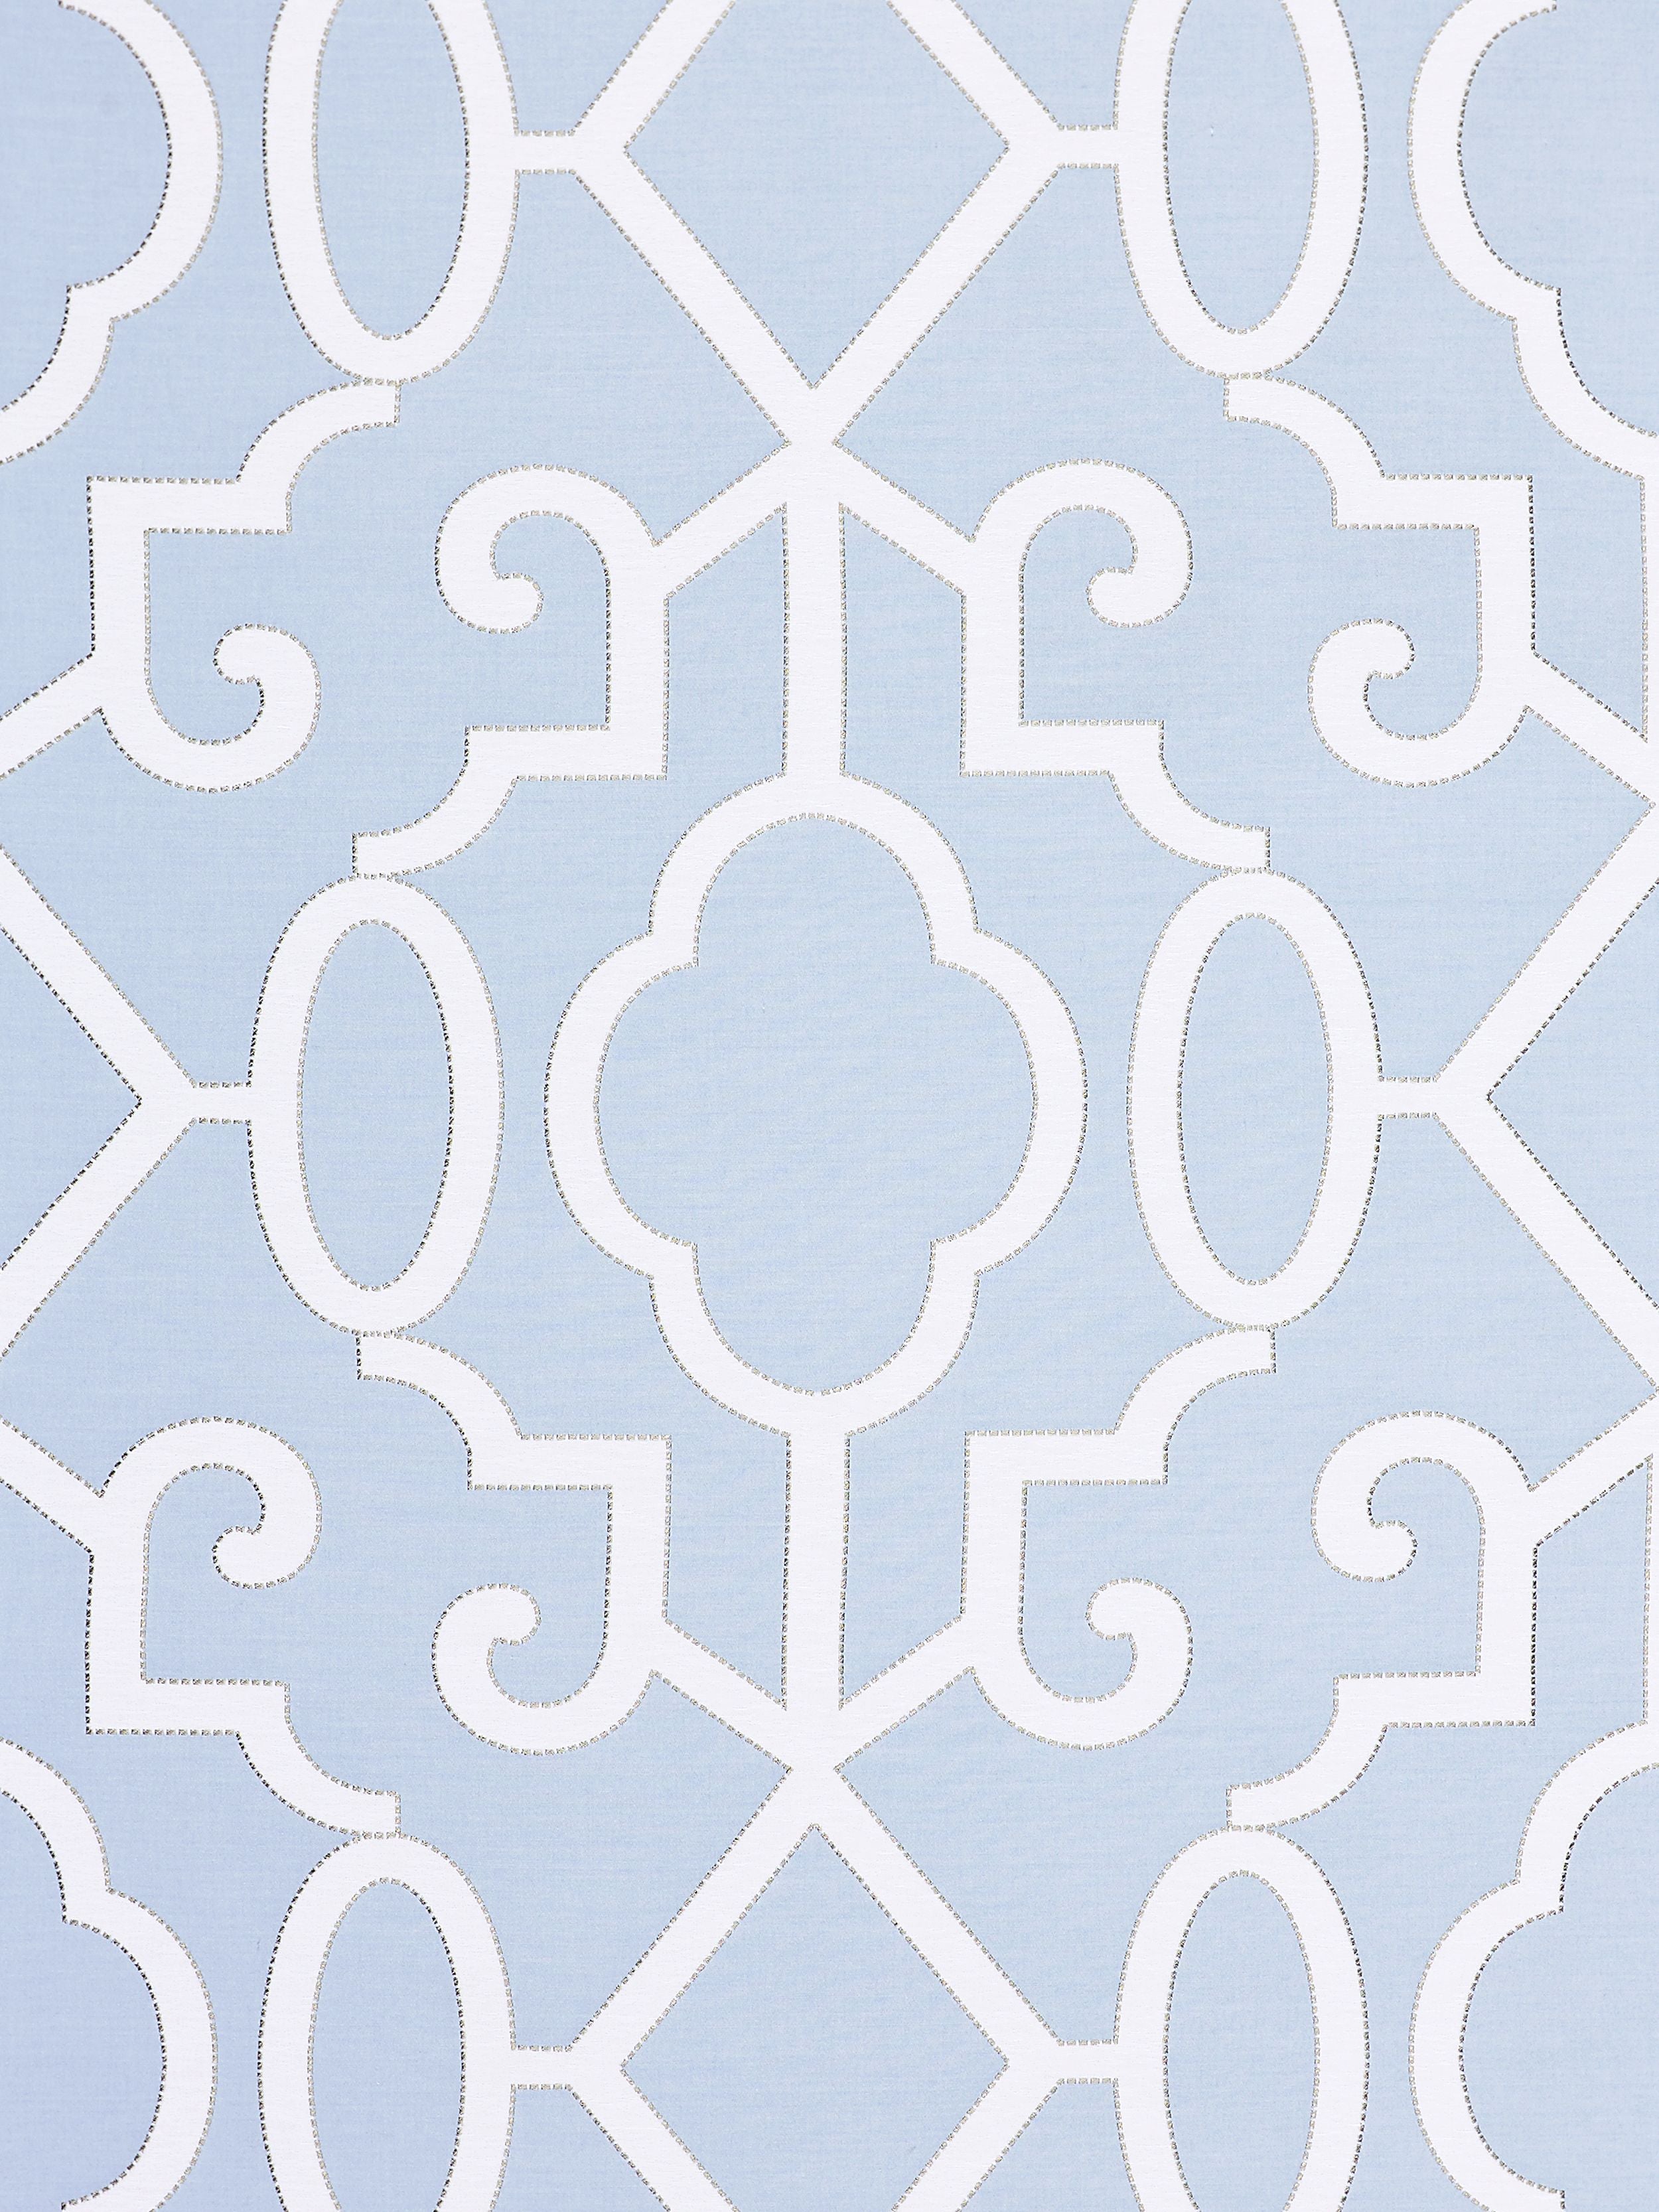 Ming Fretwork fabric in cloud color - pattern number SC 000227012 - by Scalamandre in the Scalamandre Fabrics Book 1 collection